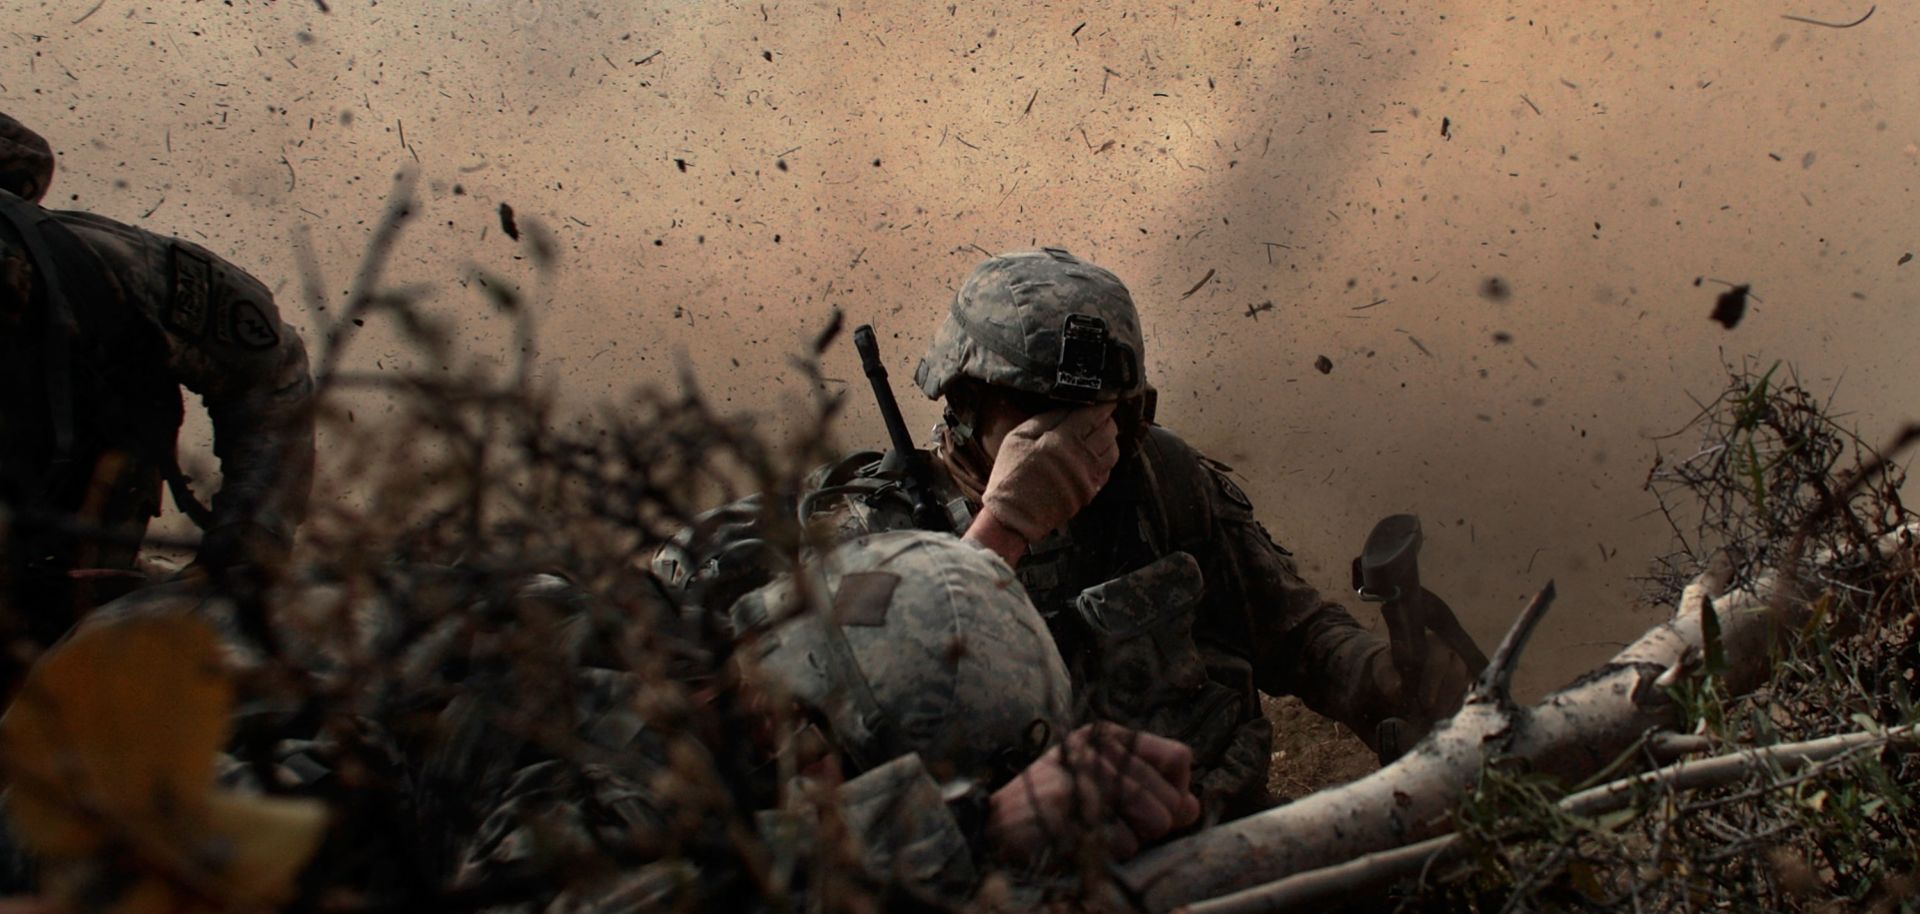  US Army soldiers in the 1/501st of the 25th Infantry Division shield their eyes from the powerful rotor wash of a Chinook cargo helicopter as they are picked up from a mission October 15, 2009 in Paktika Province, Afghanistan. 